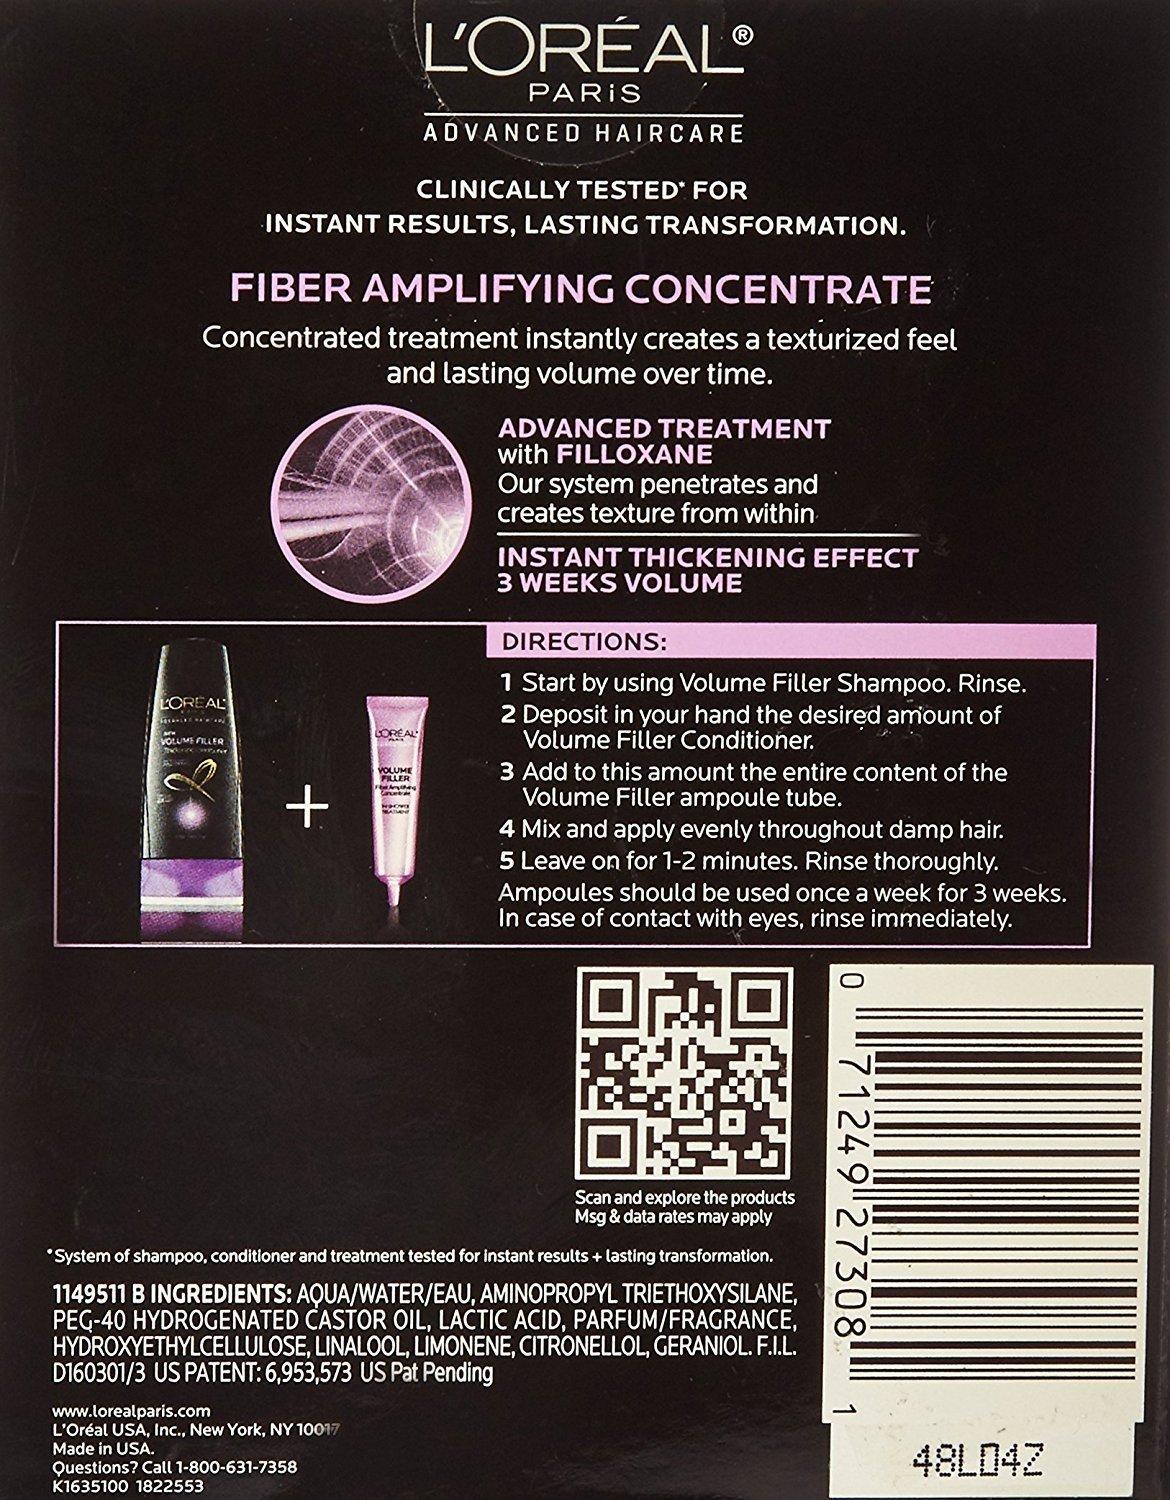 L'Oreal Advanced Haircare Volume Filler Fiber Amplifying Concentrate Ampoules 0.5 oz